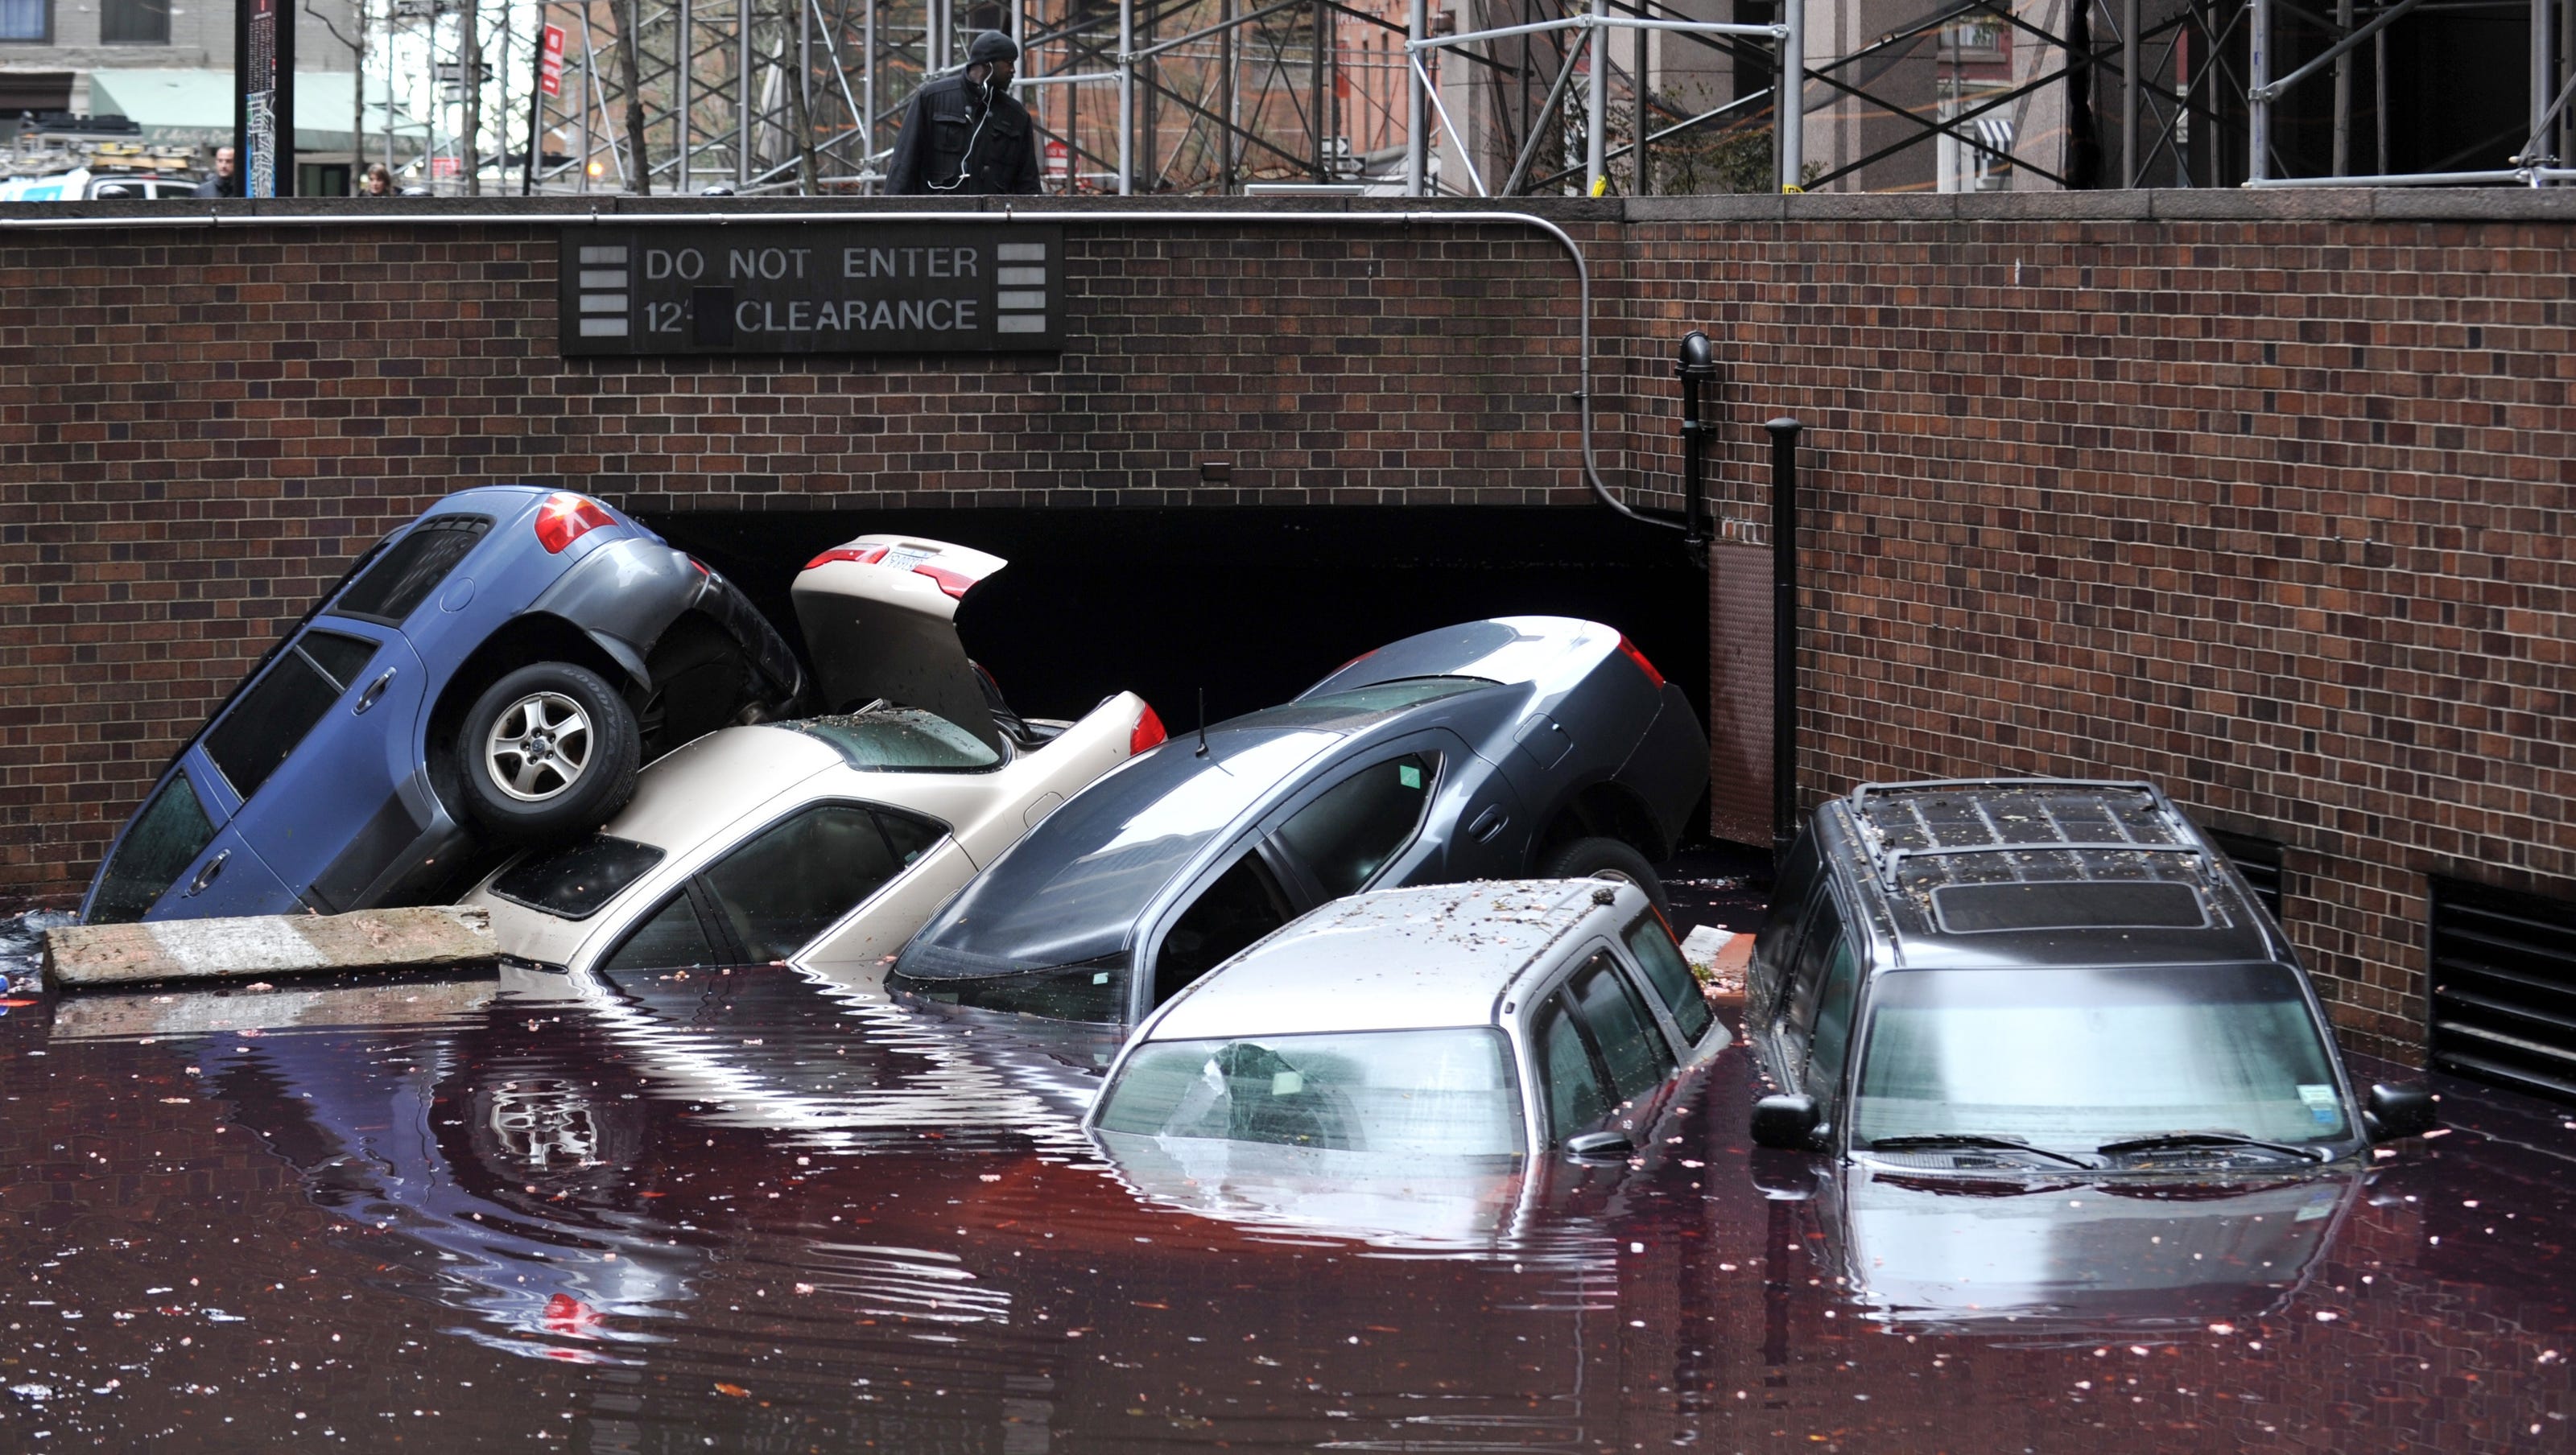 In New York City, rising sea level could cause major floods every 5 years